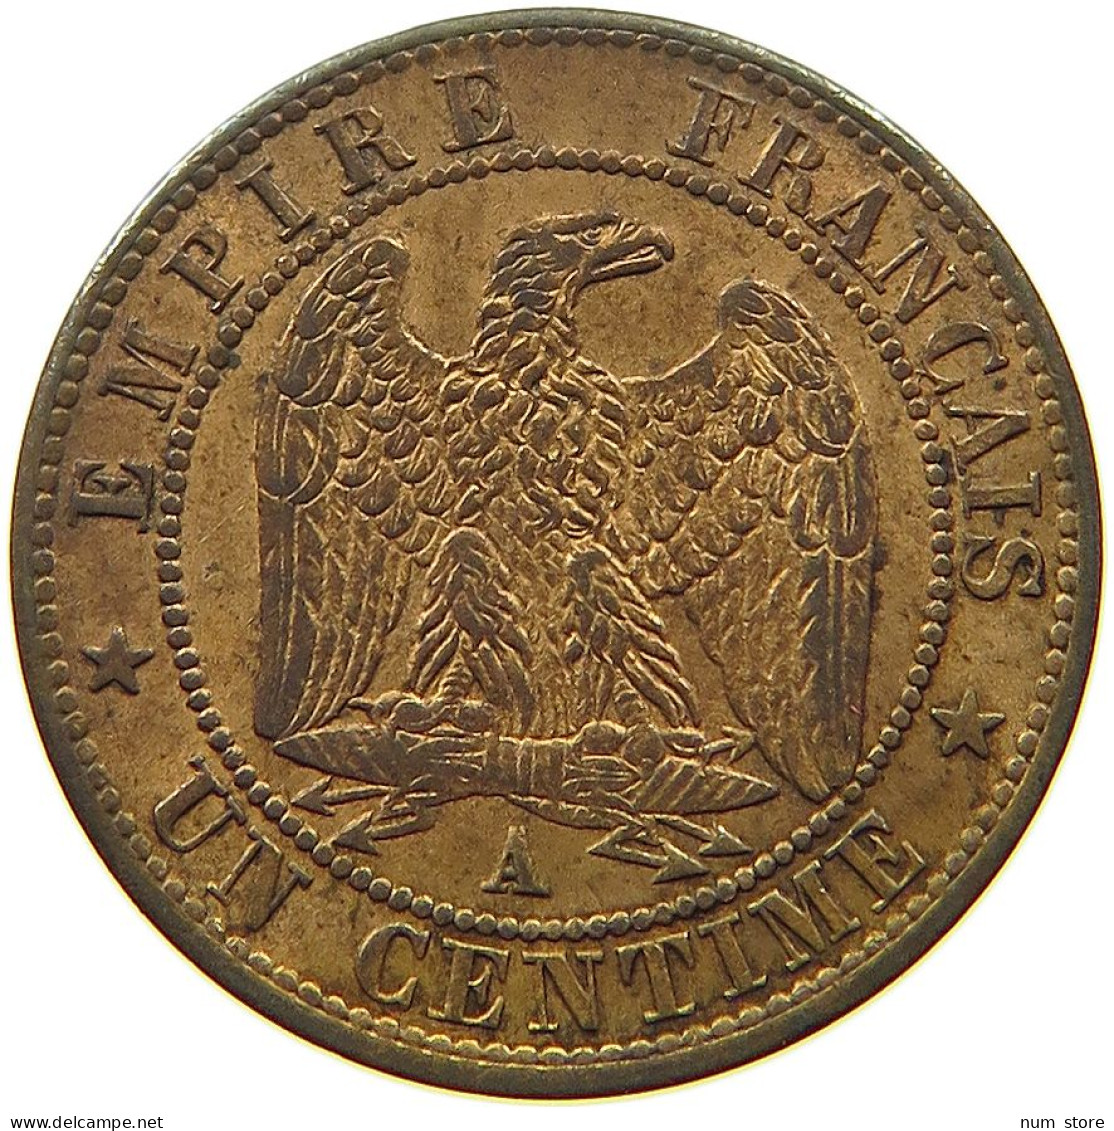 FRANCE CENTIME 1862 A Napoleon III. (1852-1870) #t058 0161 - 1 Centime